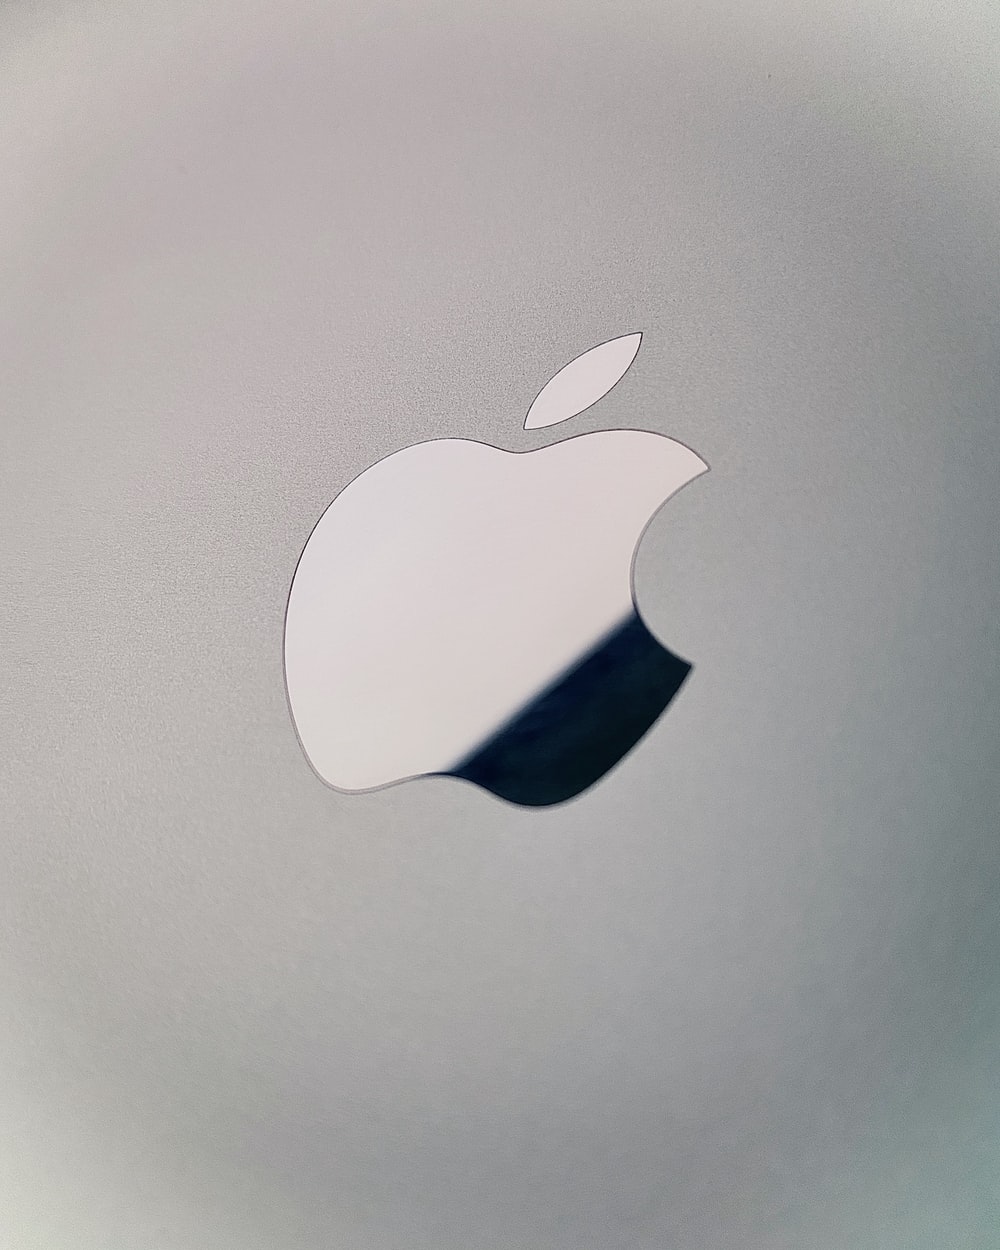 silver apple logo on silver surface photo